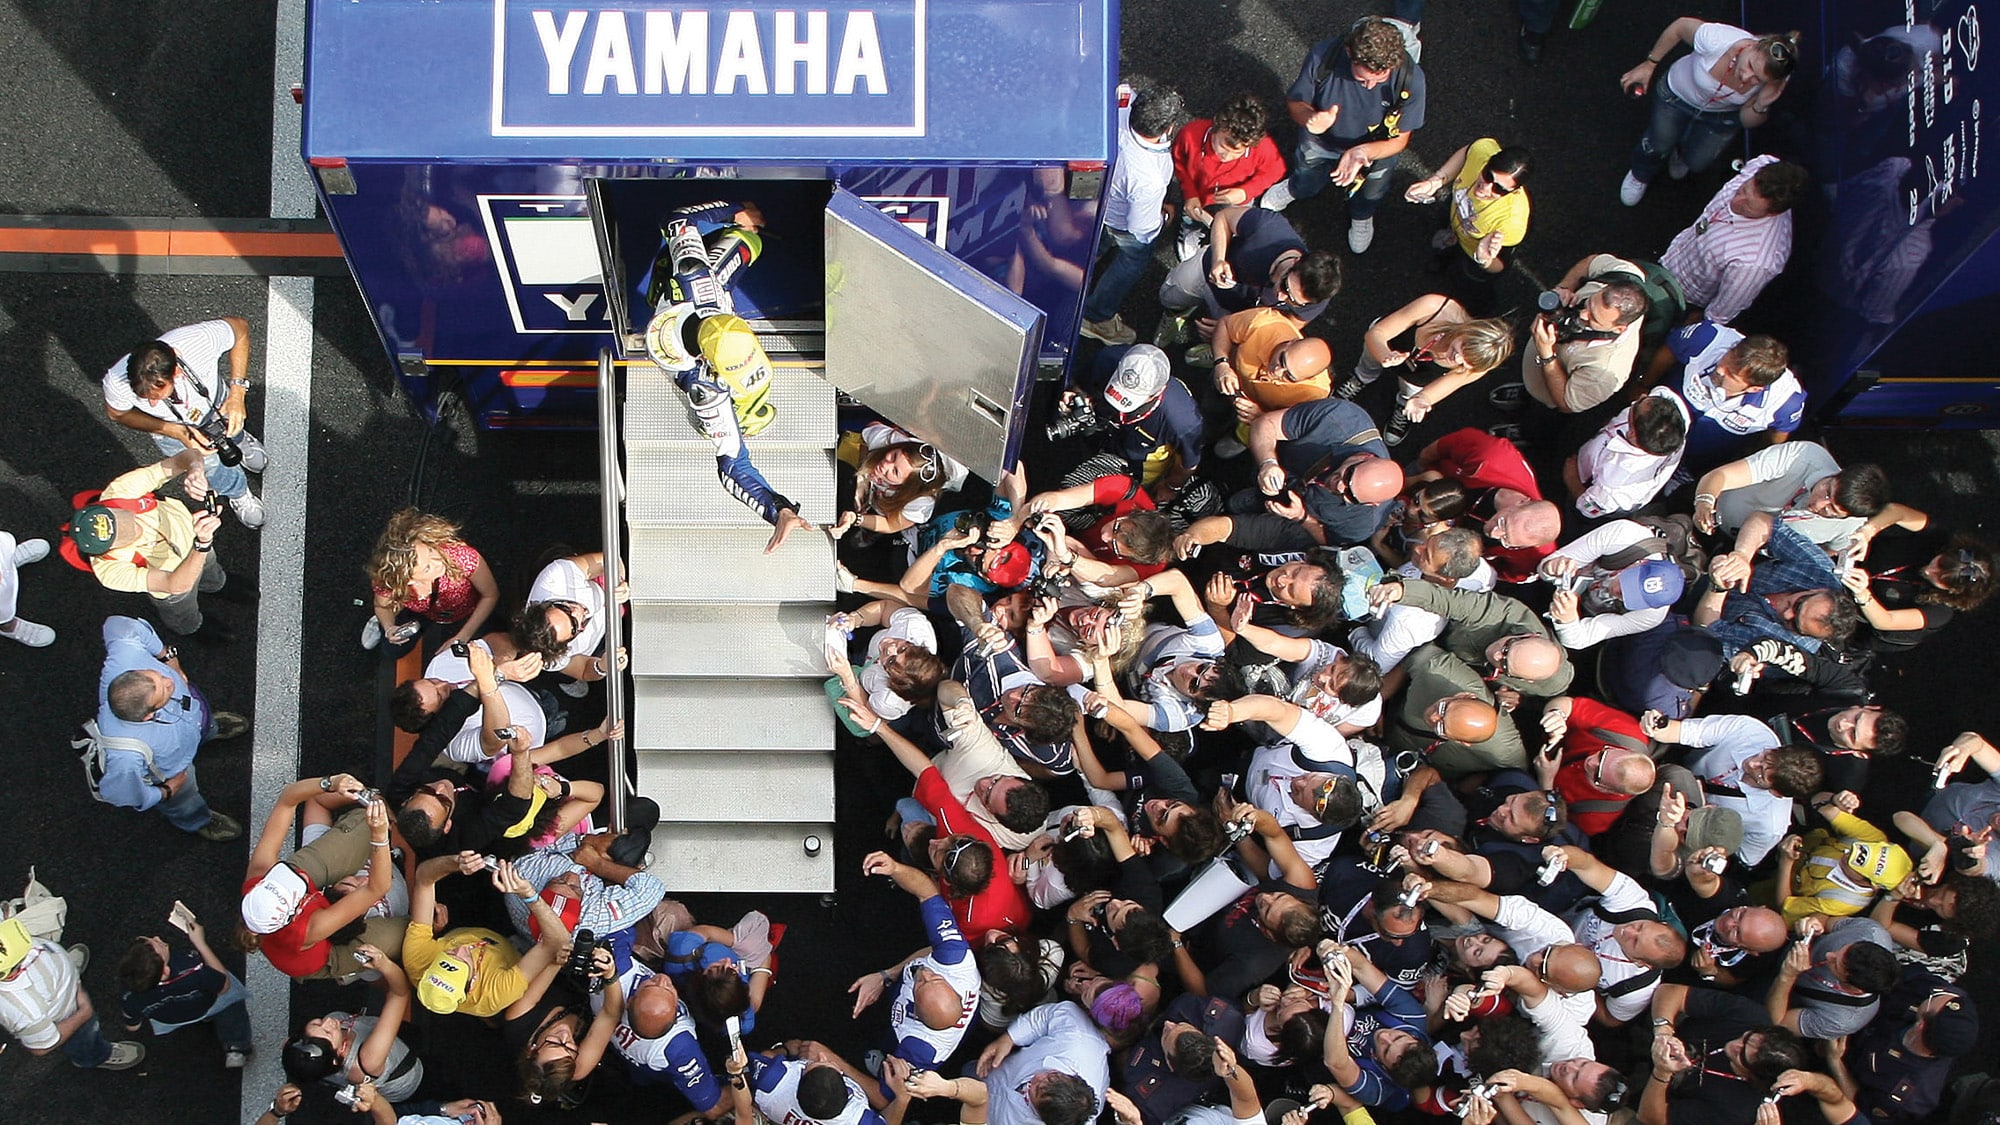 Valentino Rossi waves at a paddock crowd from his motorhome